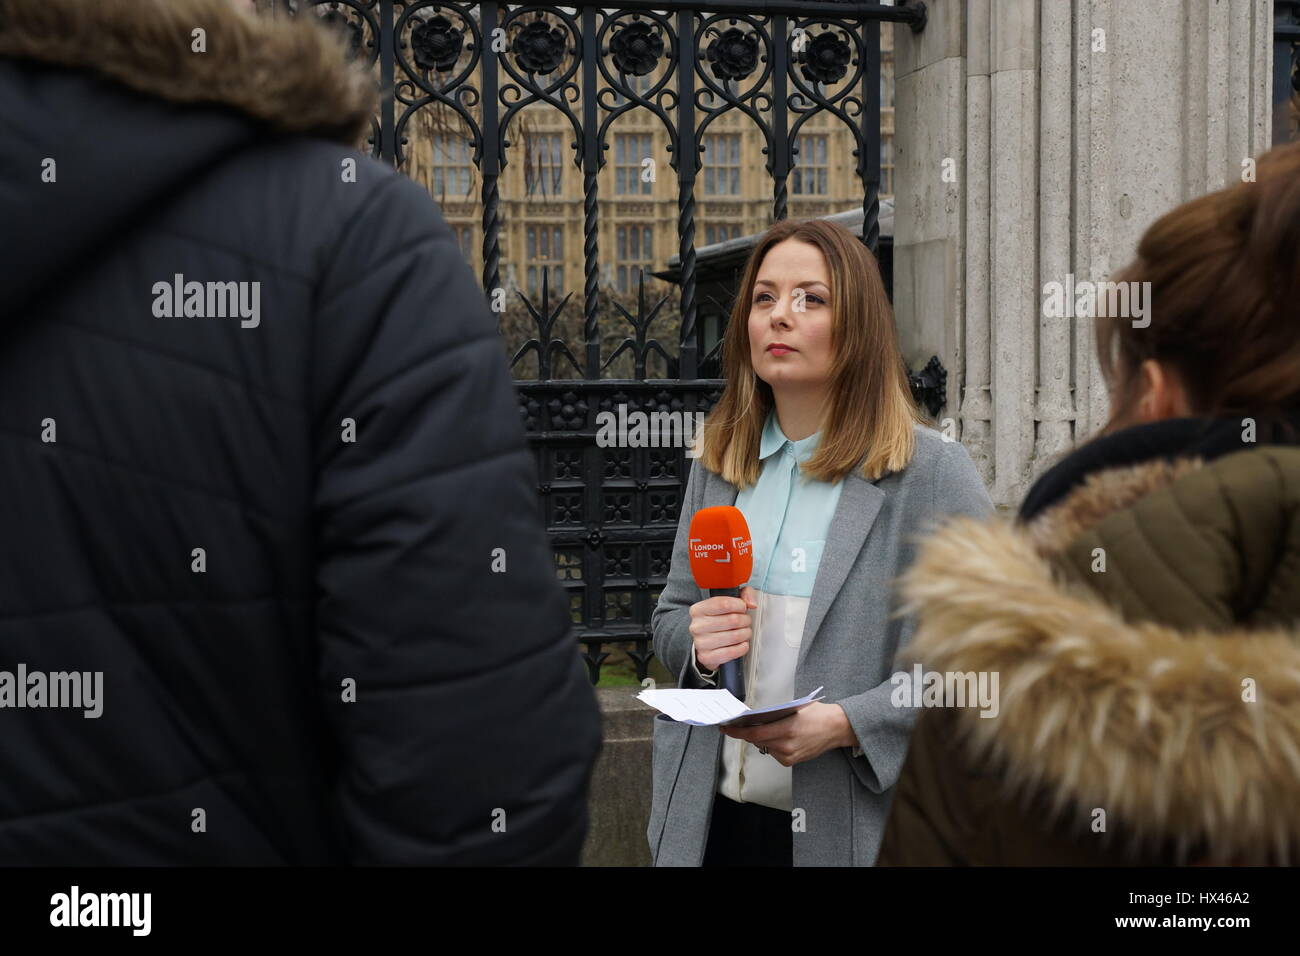 London, UK. 23rd Mar, 2017. Television journalist reports from the scene outside the Houses of Parliament in the wake of the murder of PC Keith Palmer by Khalid Massood, also known as Adrian Elms, also known as Adrian Russell Ajao on Wednesday 21 March 2017. Members of the public pay floral tribute whilst television journalists make their reports and police officers survey the scene. Credit: Peter Hogan/Alamy Live News Stock Photo